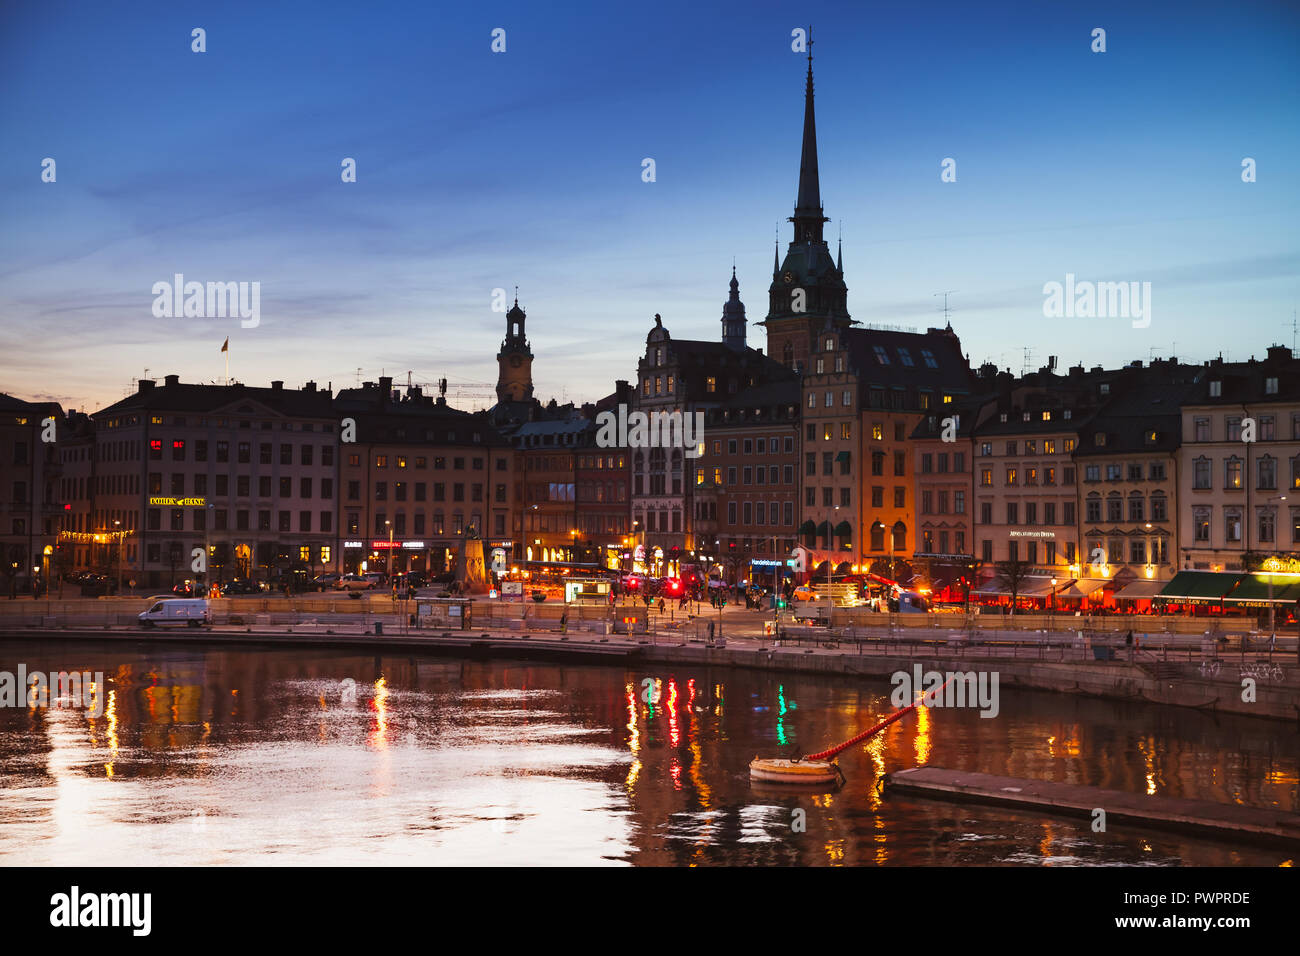 Stockholm, Sweden - May 4, 2016: Silhouette cityscape of Gamla Stan city district, central Stockholm with German Church spire over night sky Stock Photo